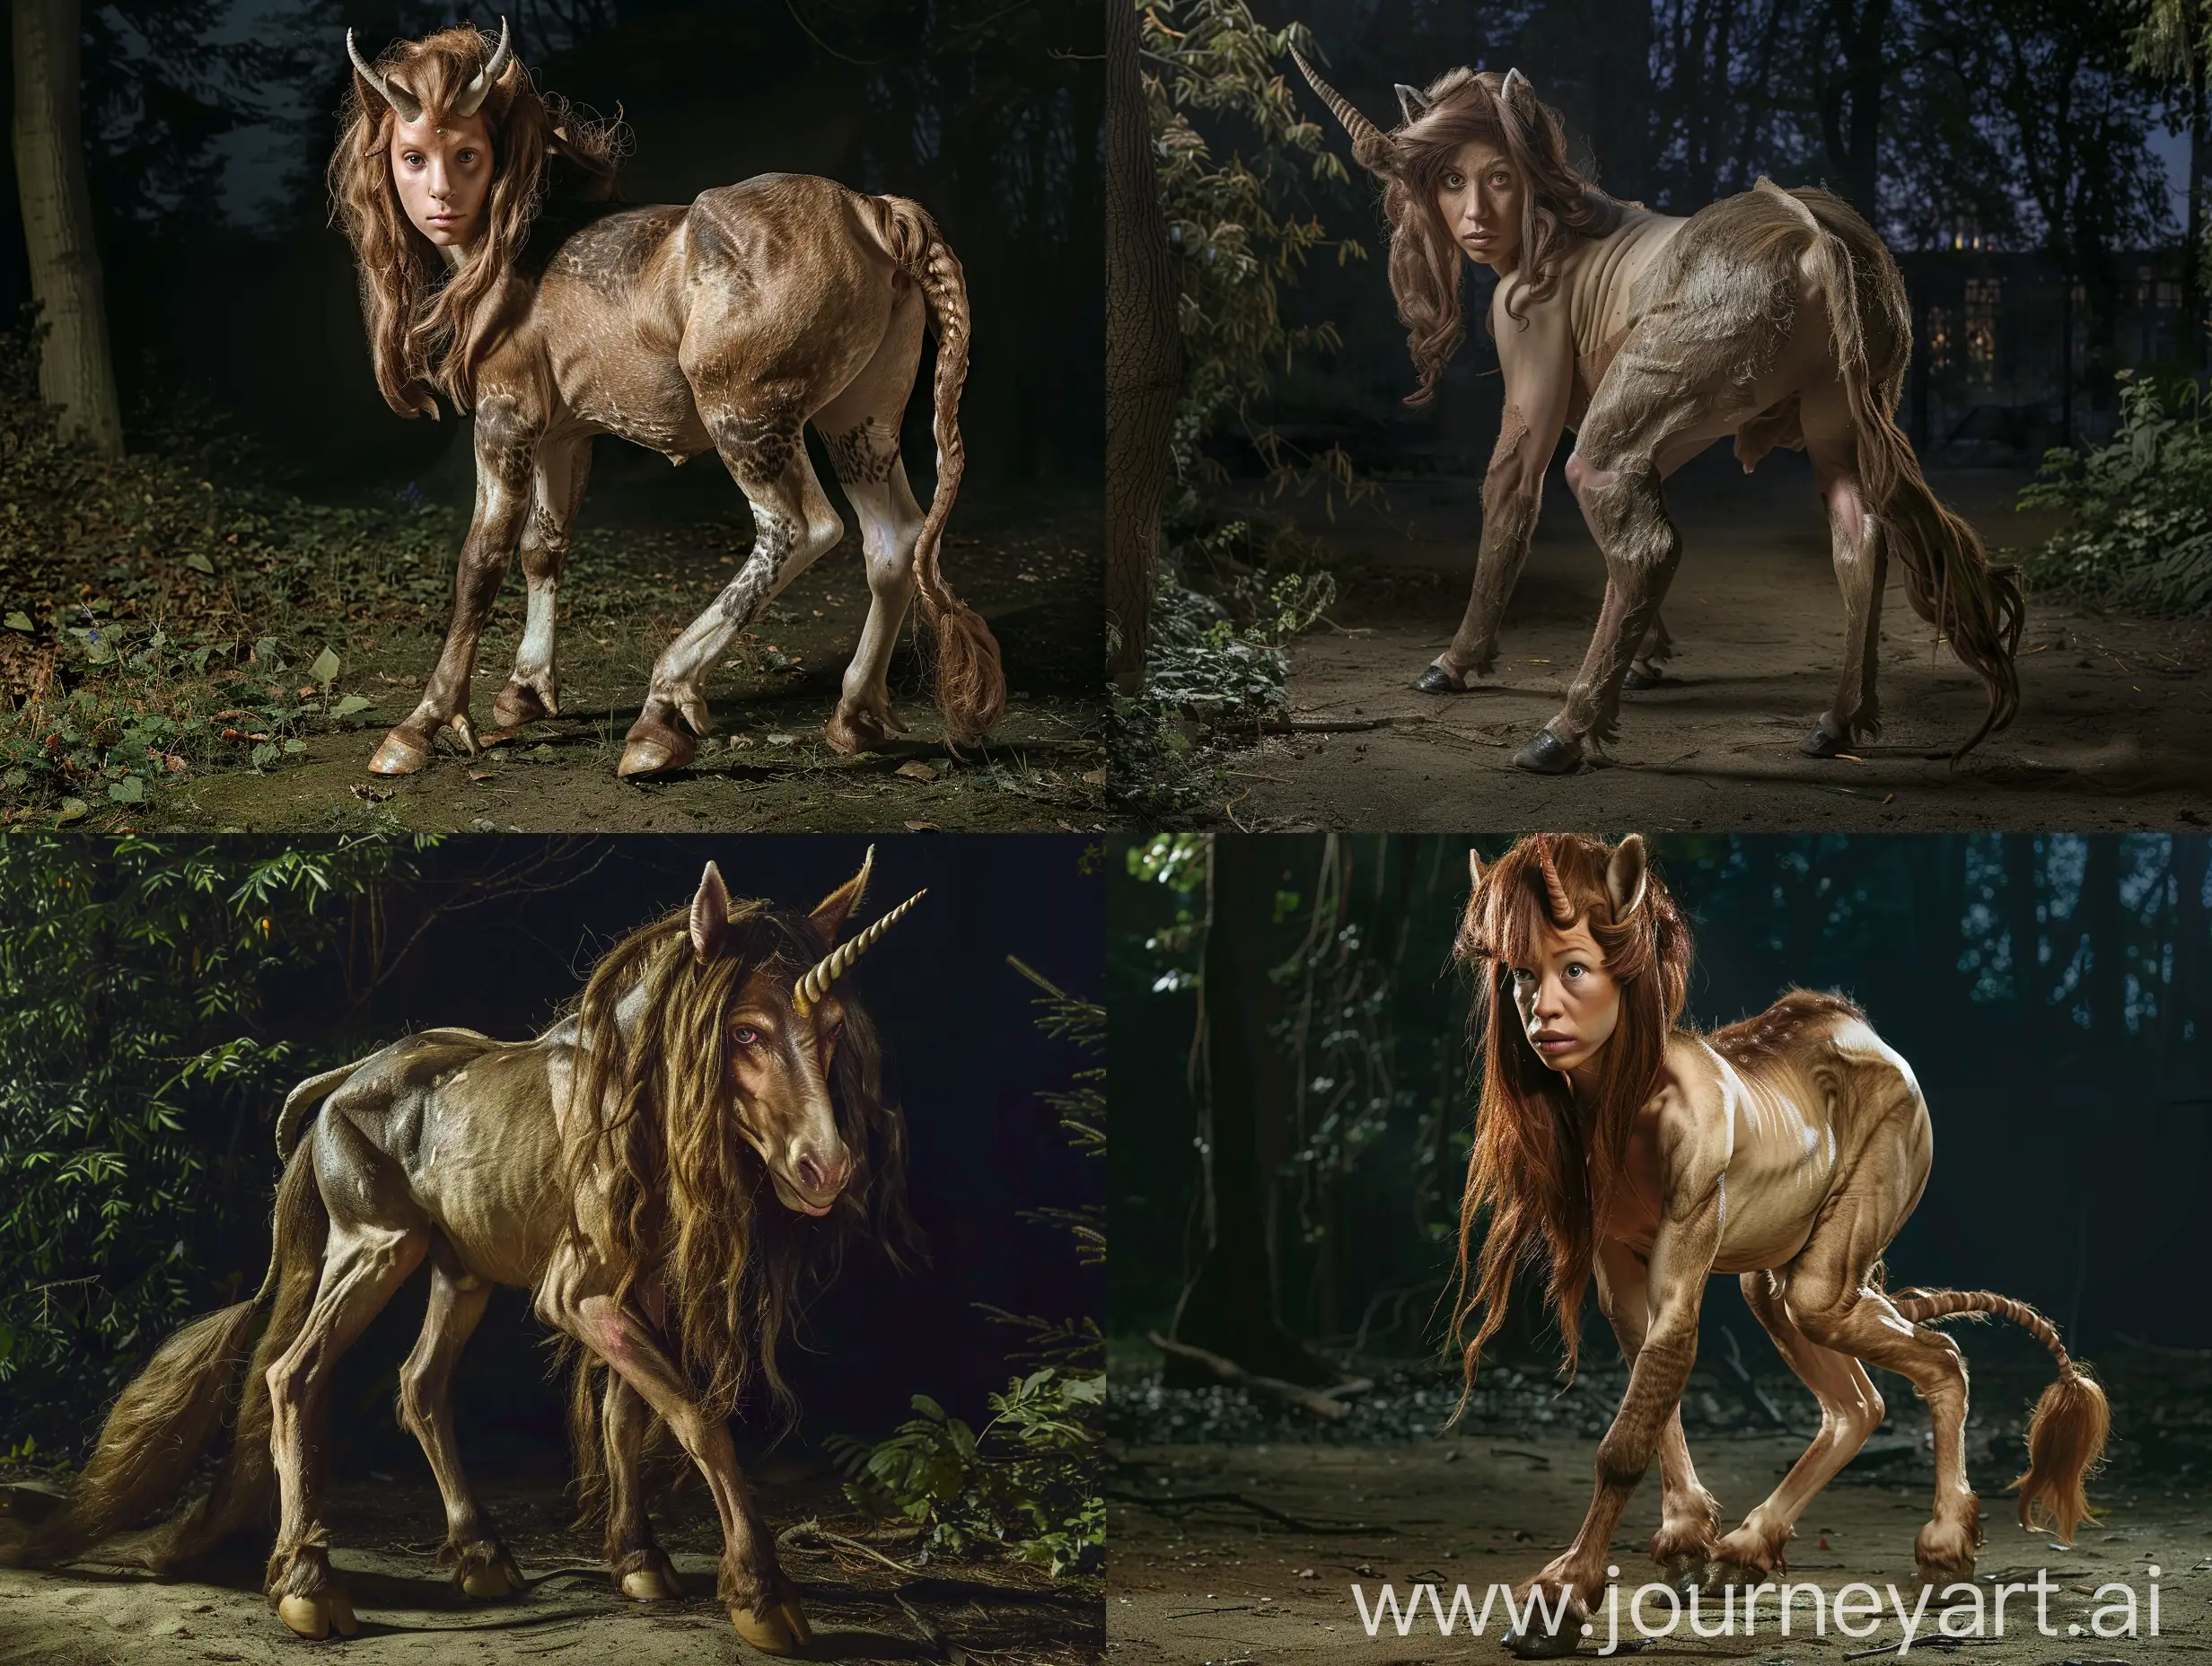 Majestic-Female-Centaur-with-Brown-Hair-in-Night-Forest